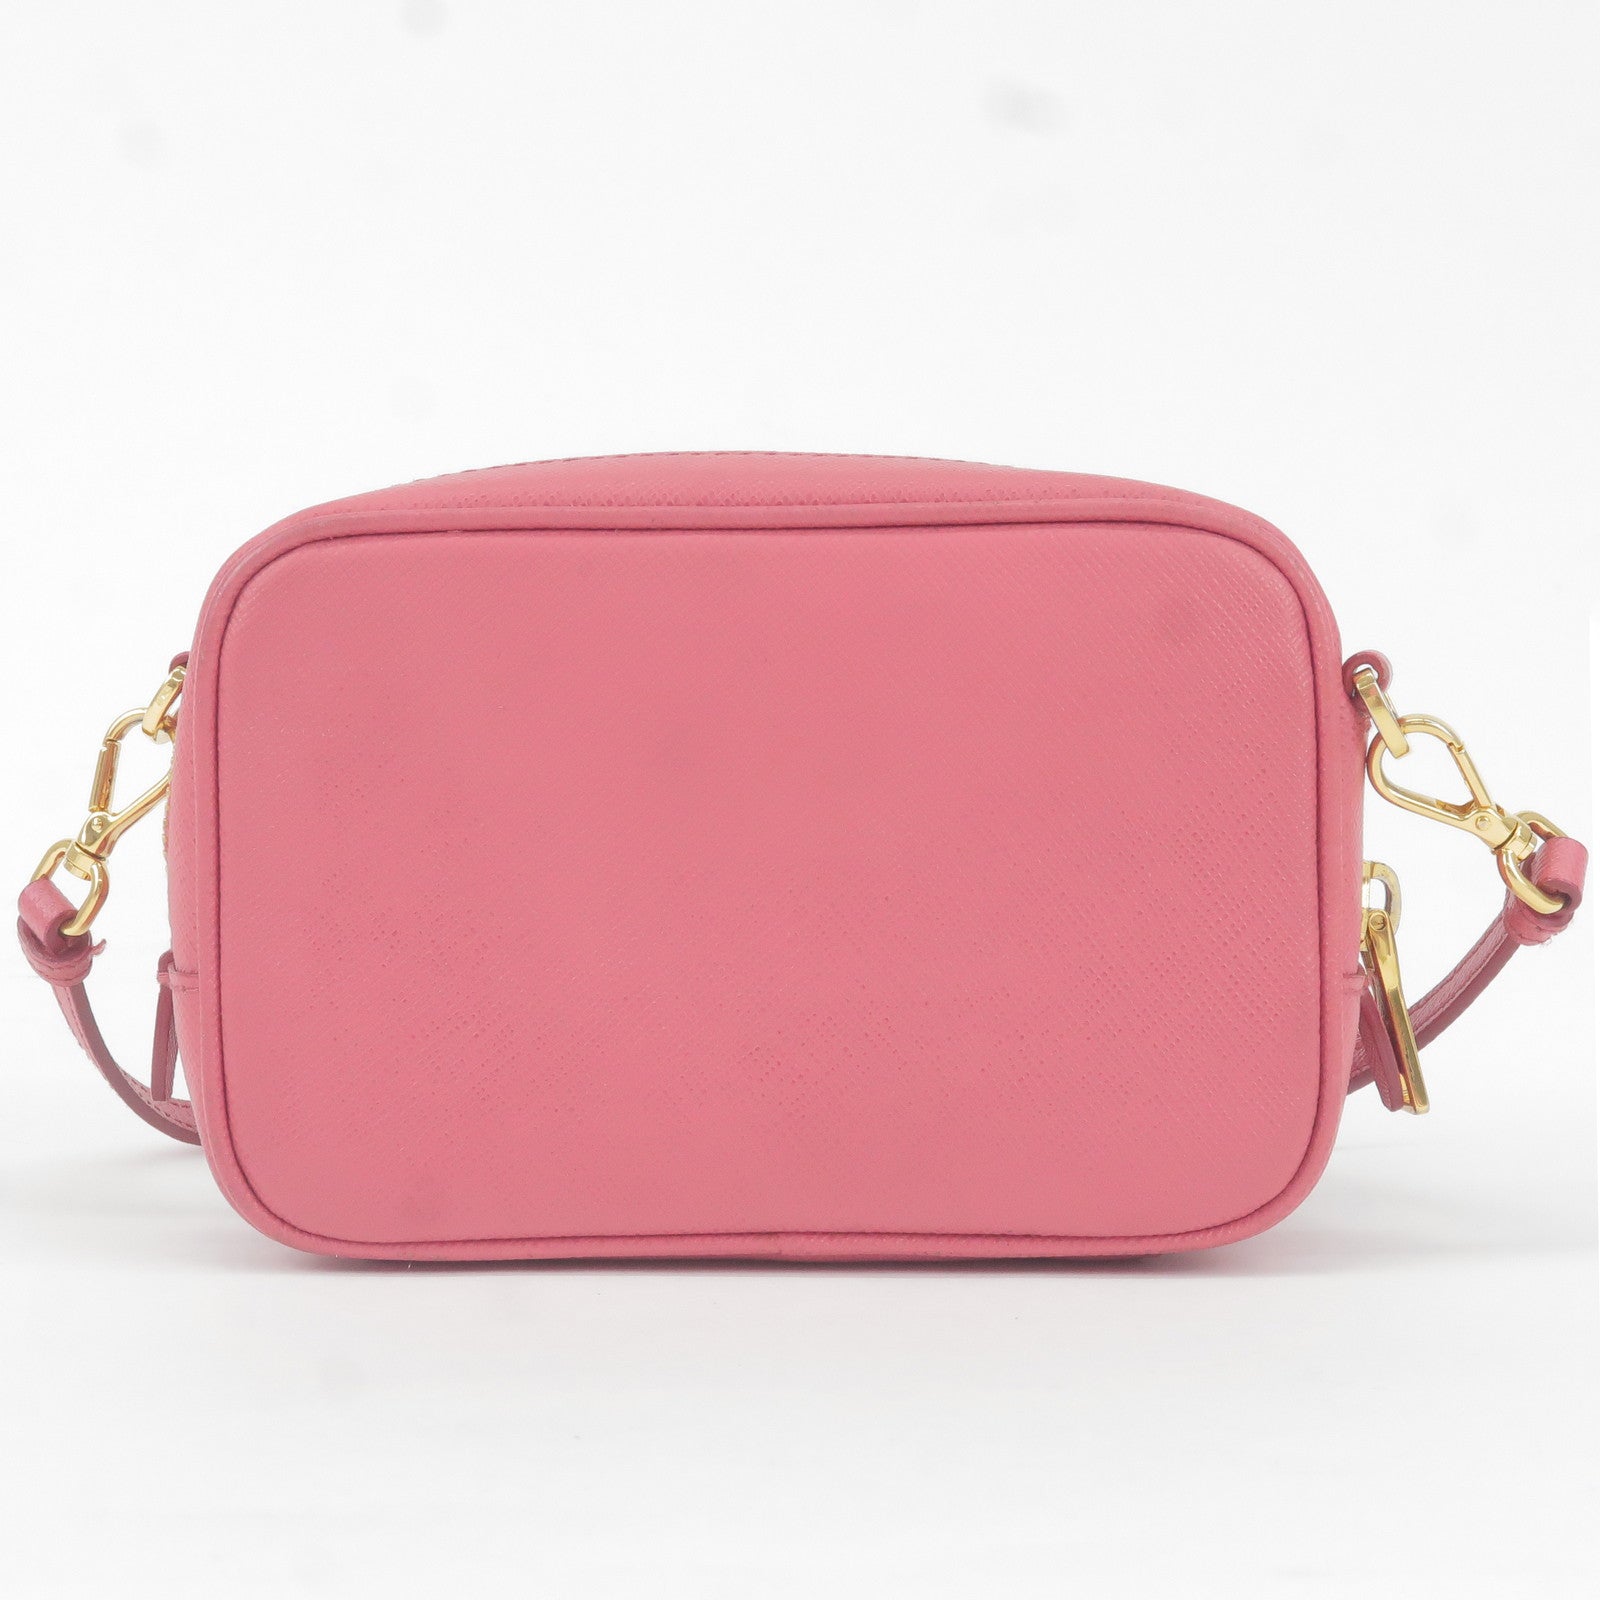 Dark and light pink bag, shoes and purse with a decorative bow in the shape  of